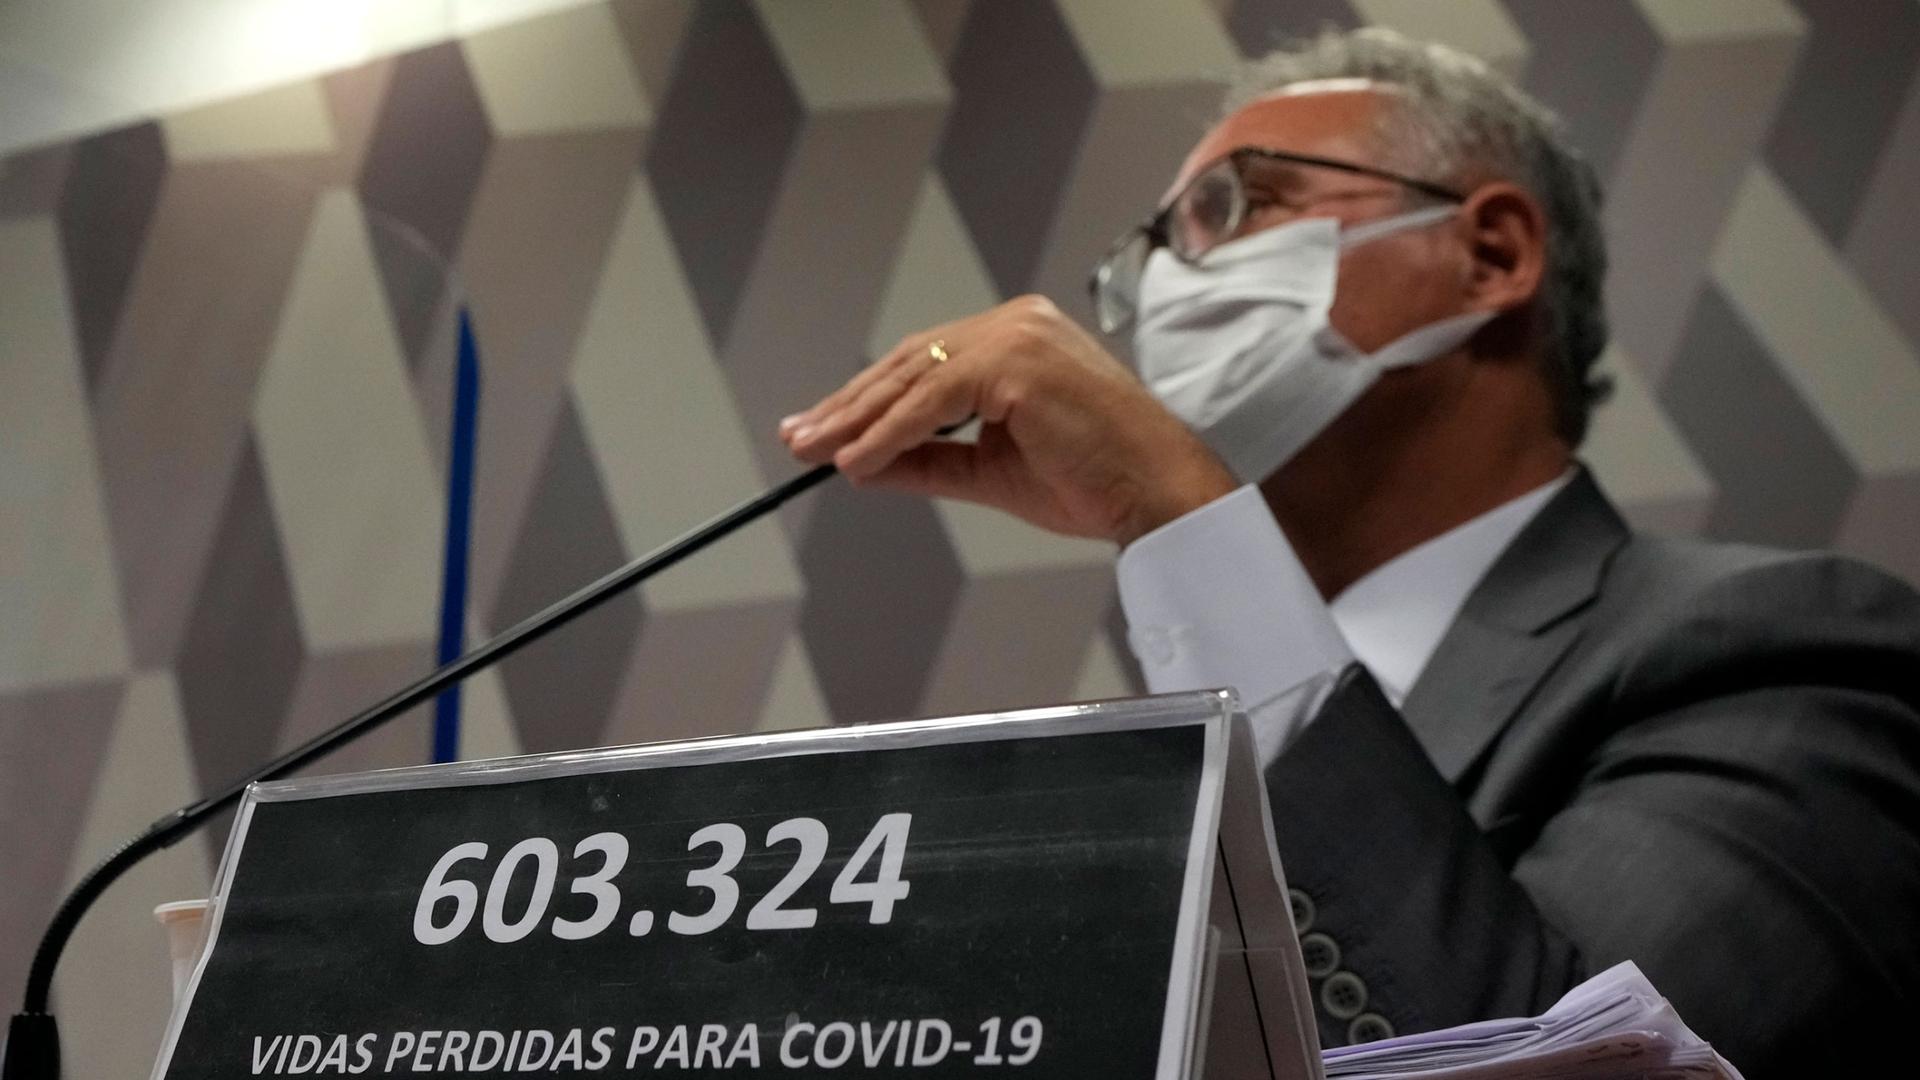 A plaque reads in Portuguese "603,324 lives lost to COVID-19" in front of Senator Renan Calheiros during the session by a Senate committee investigating the handling of the pandemic by the administration of President Jair Bolsonaro.